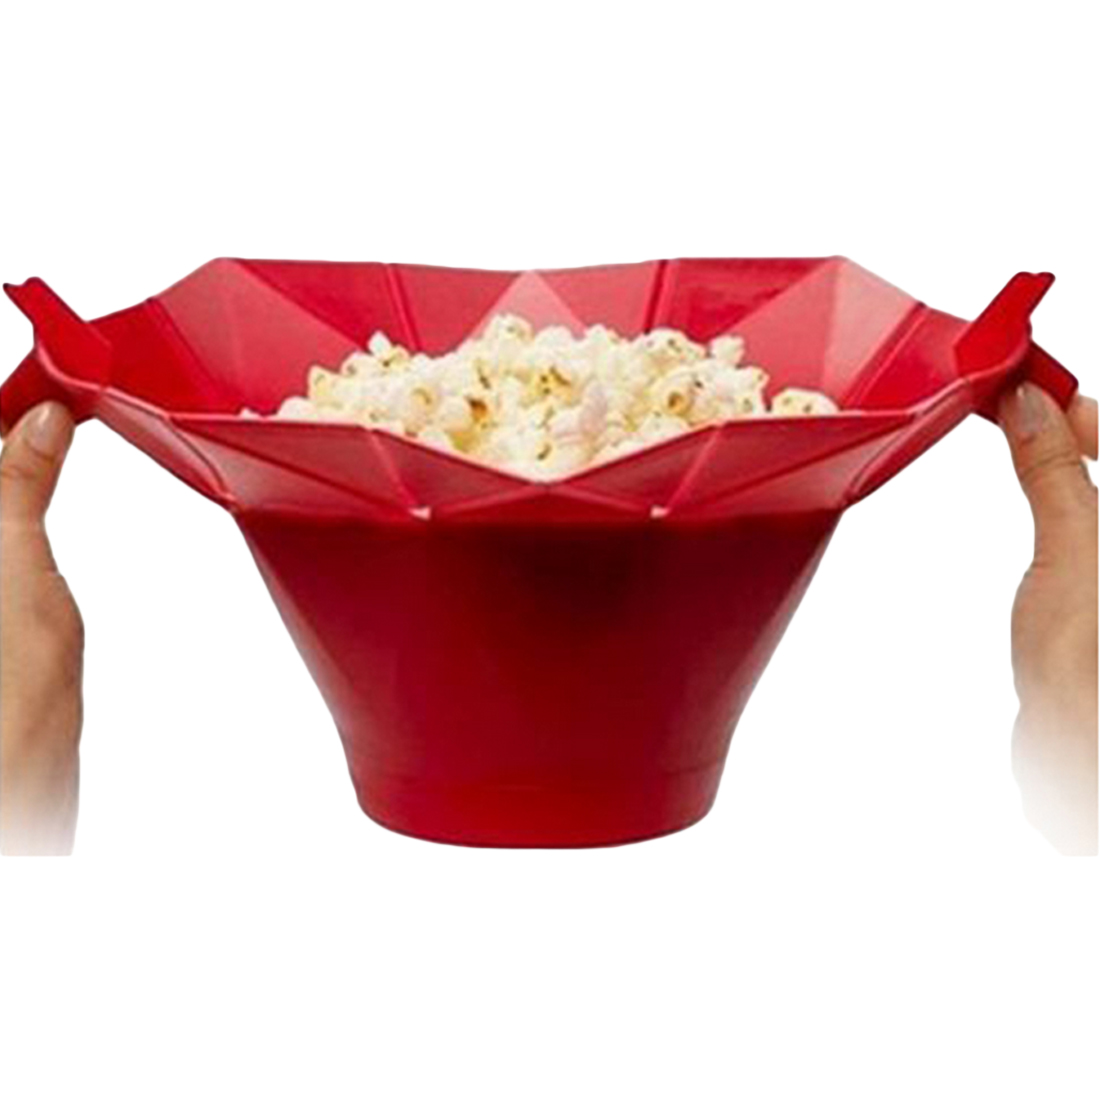 1pcs Popcorn Maker DIY Silicone Microwave Popcorn Maker Fold Bucket Kitchen Cooking Tool Accessories Red Green